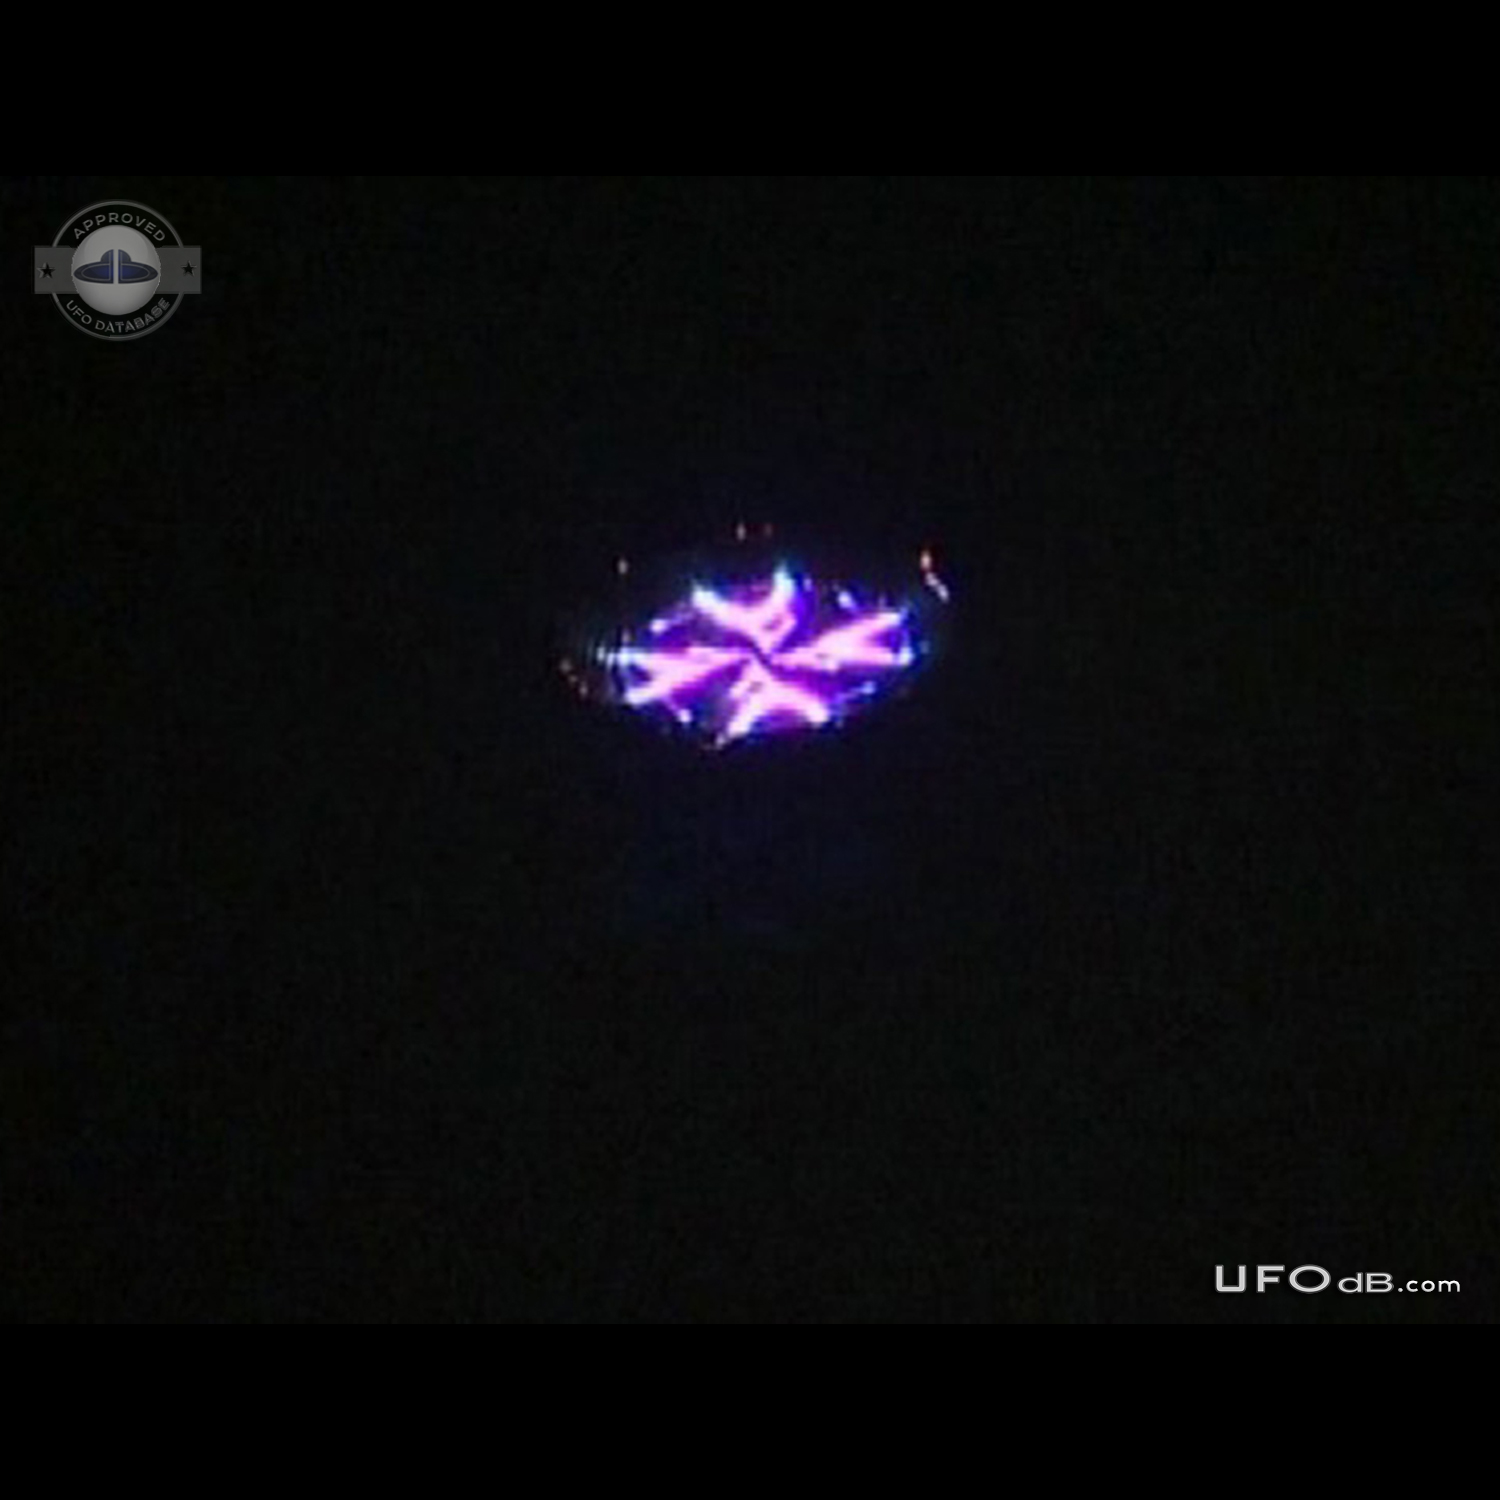 It was a big flying object UFO with purple or teal light - Los Banos UFO Picture #597-2